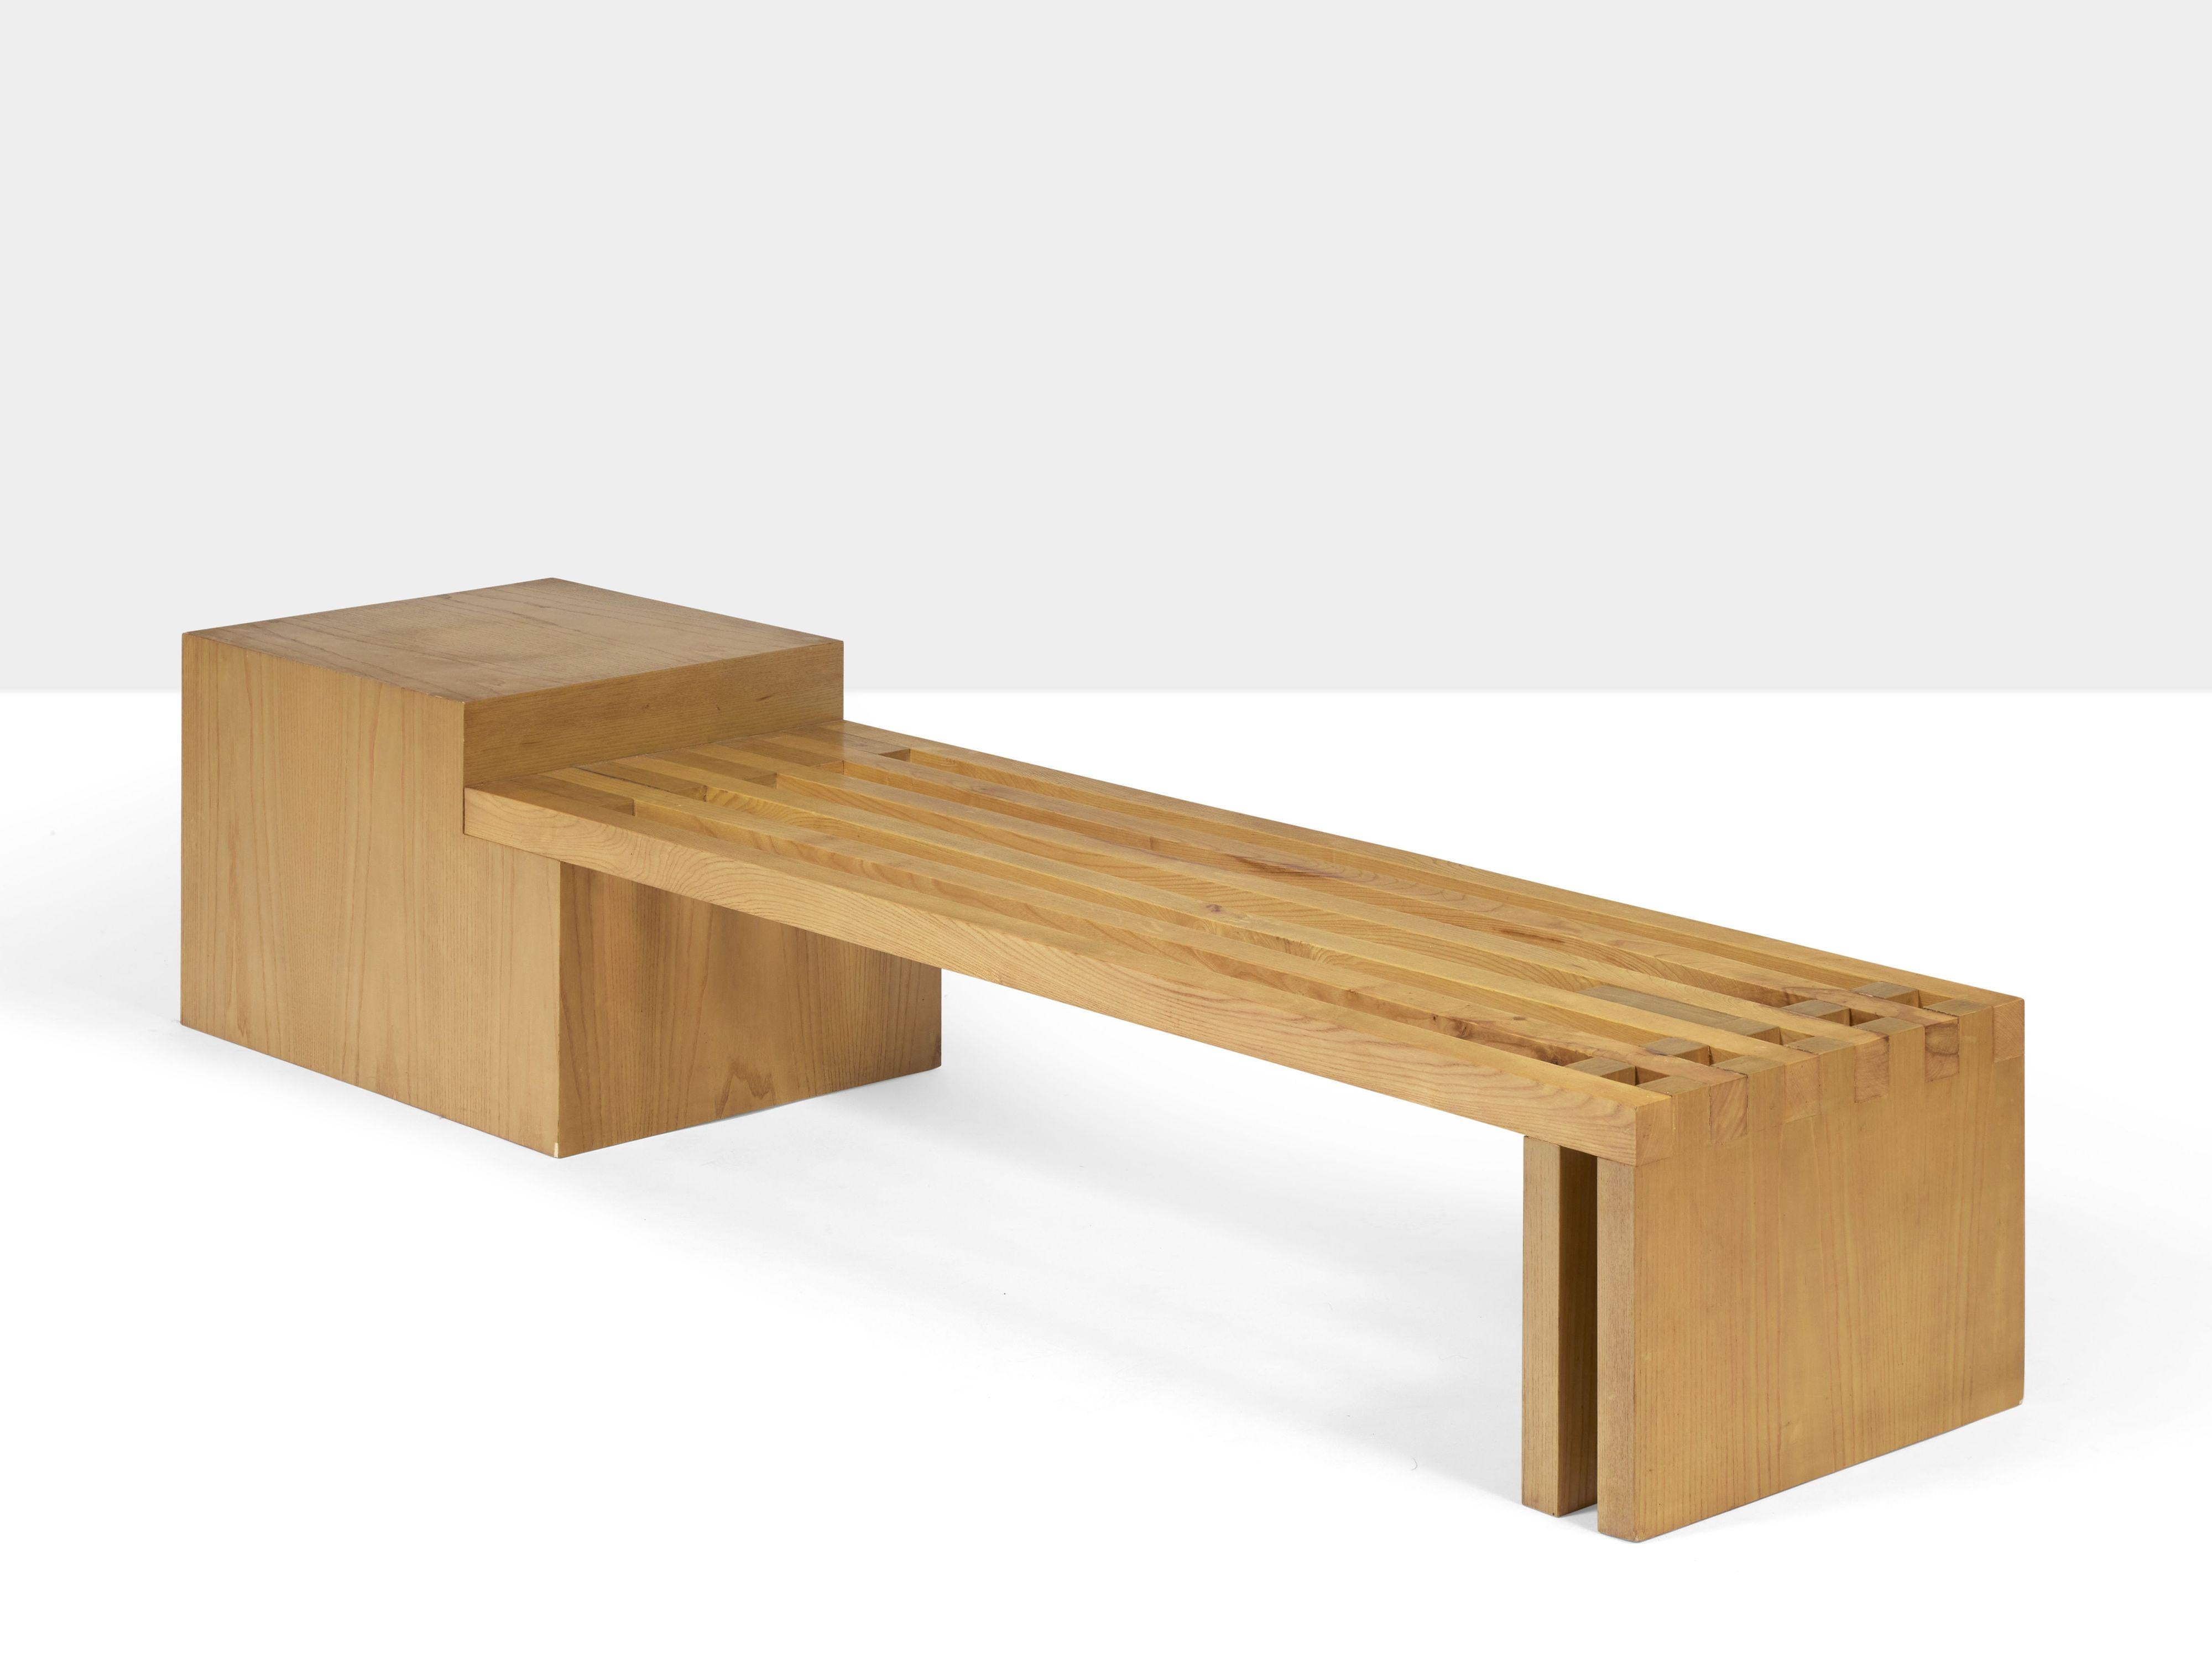 Wooden bench by Bruno Nanni, Italy, 1970s

A monumental and sculptural work, the bench represents one of the very rare testimonies of Bruno Nanni's activity in the world of design. The design lines are essential but very powerful, essential but